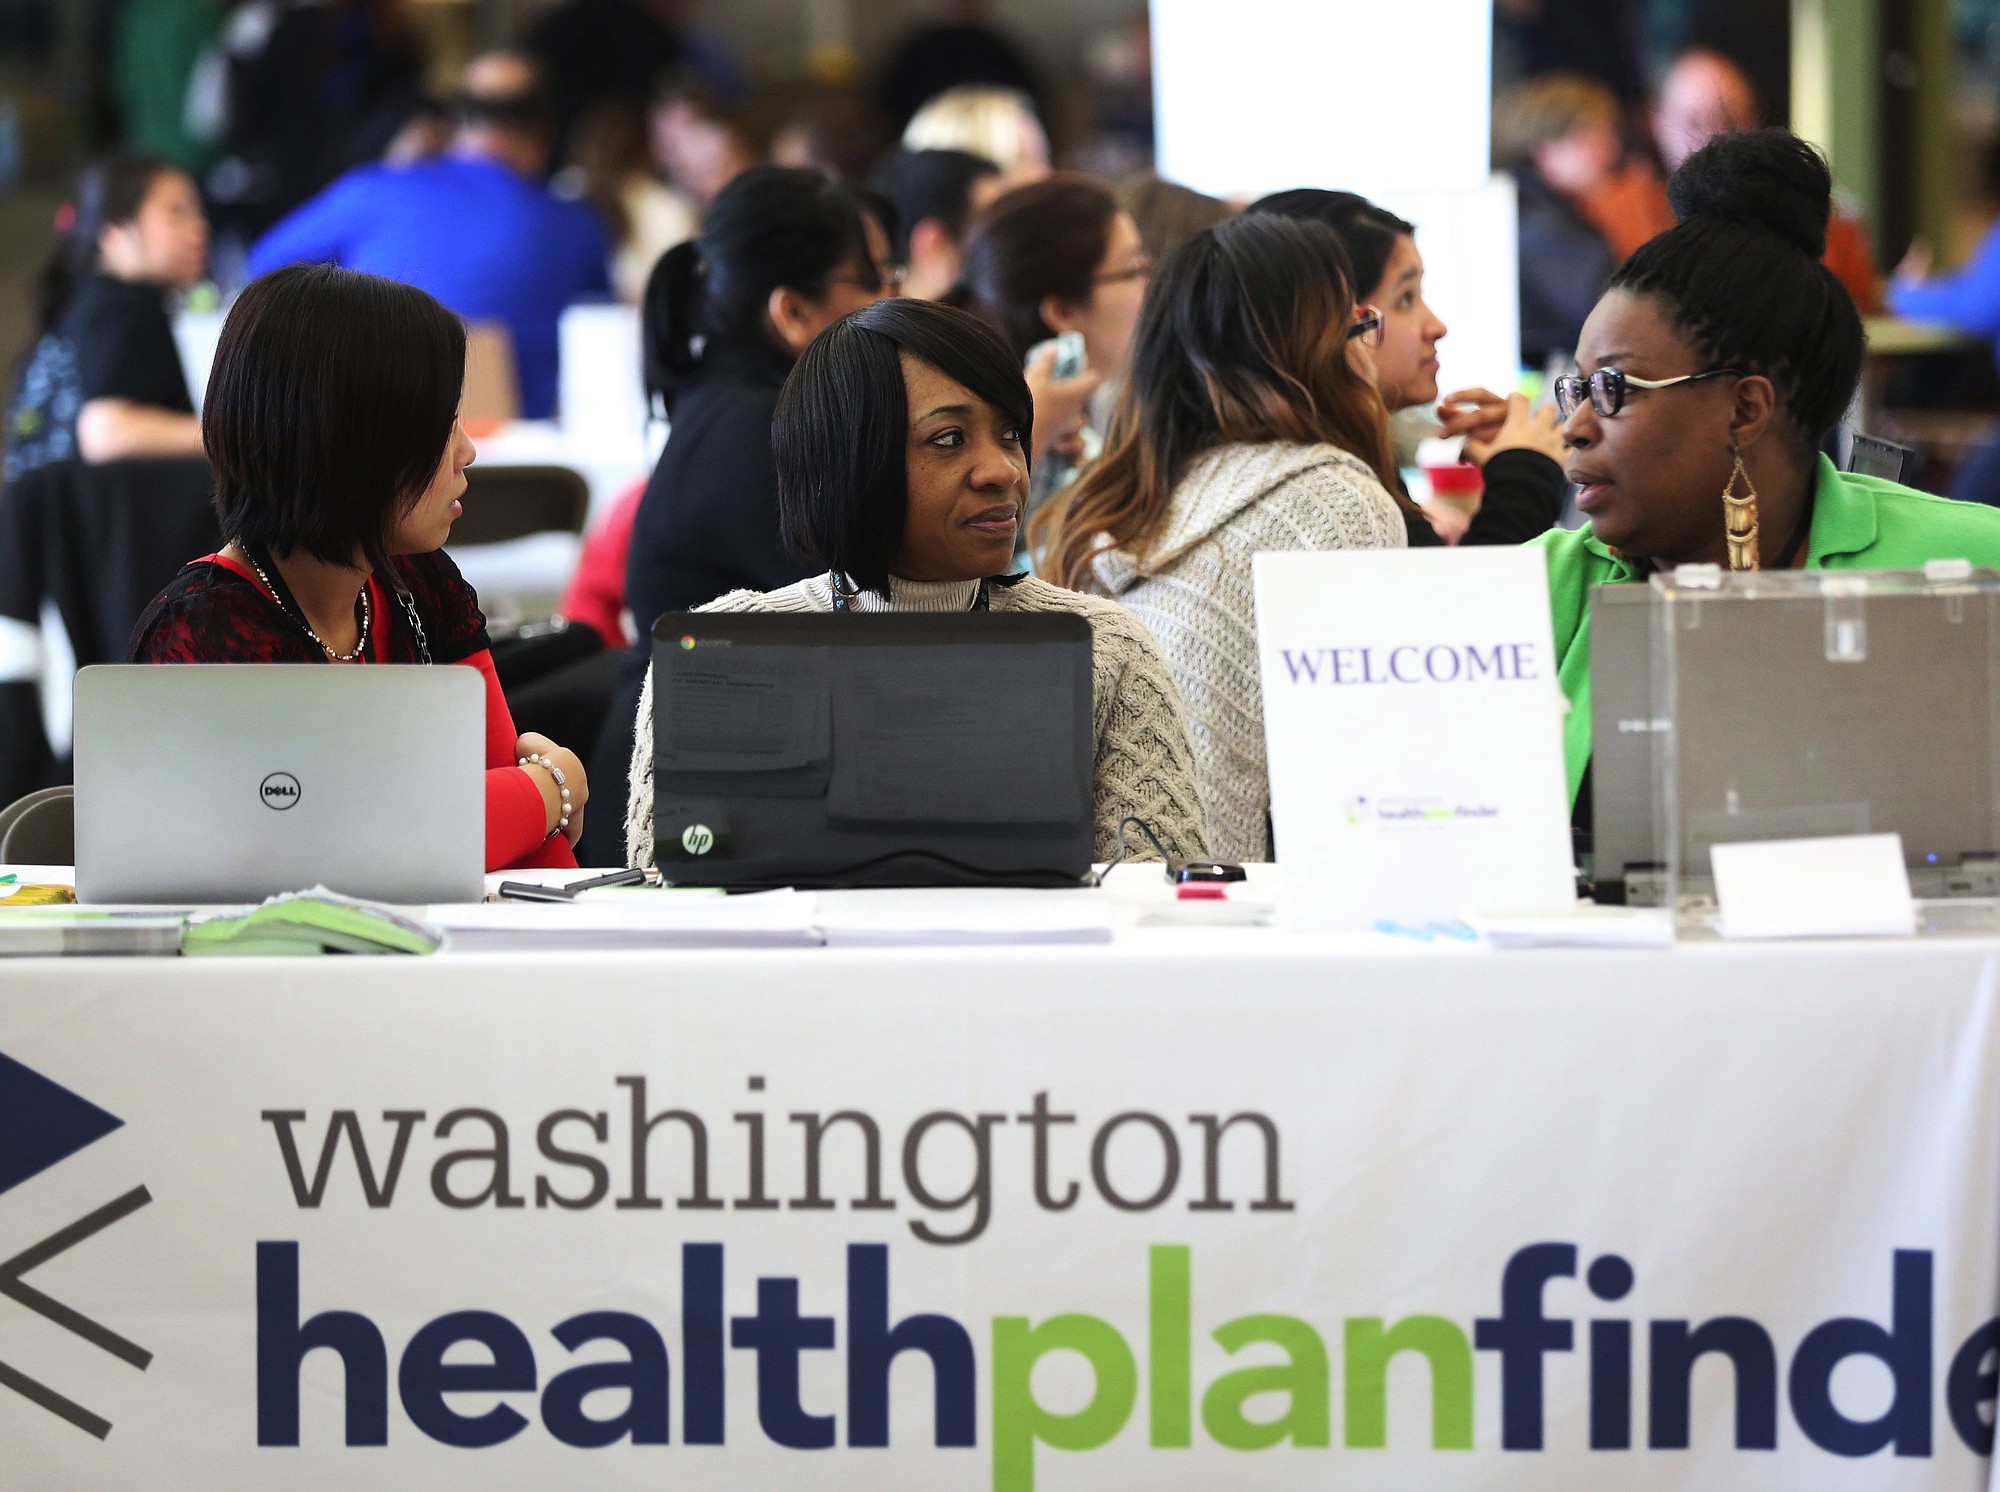 Christy An, from left, Pamela Lyons and Deborah Stanley sit at the welcome table as they wait to answer questions during a Washington Healthplanfinder sign-up event at Westfield Southcenter in Tukwila, on Saturday.